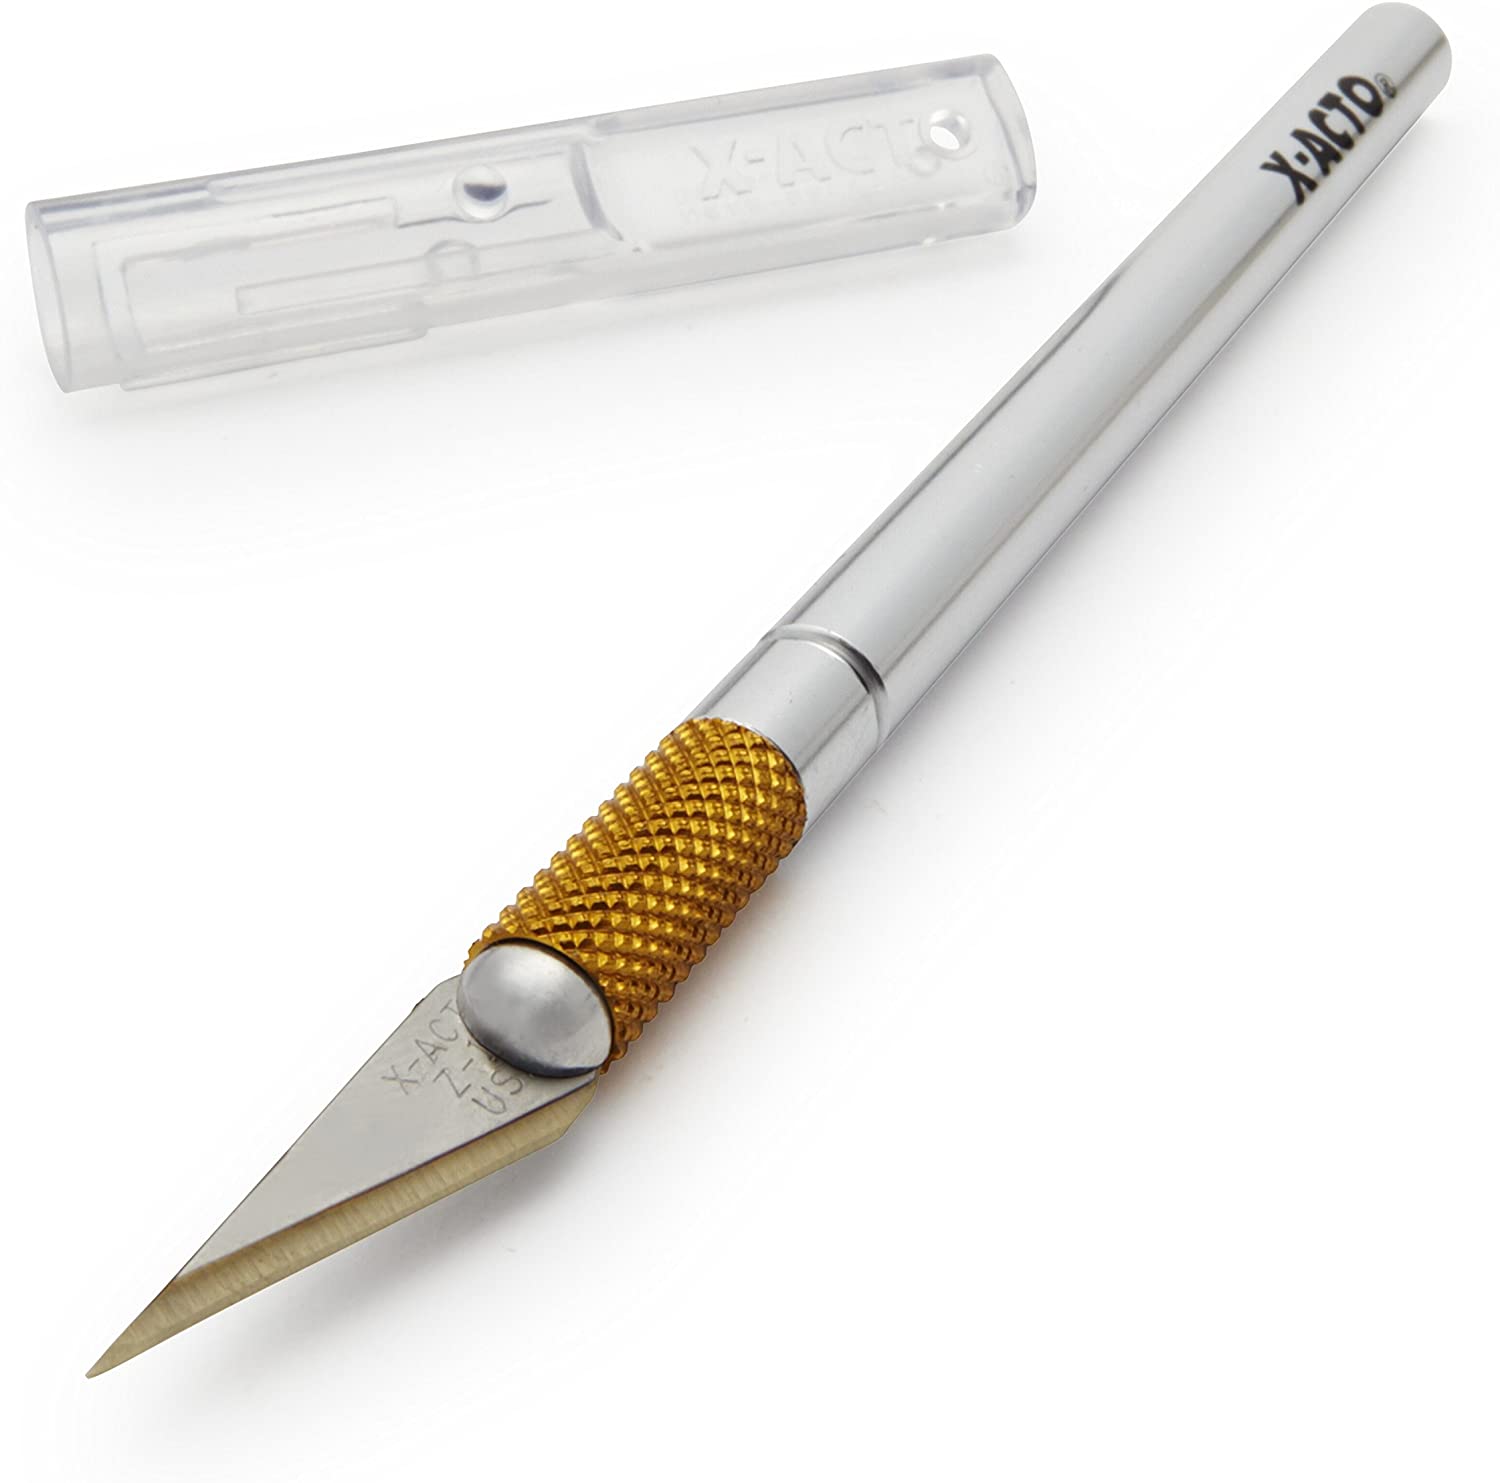 X-Acto Z Series #1 Precision Knife w/ Safety Cap $3.49 + Free Shipping w/ Prime or on $25+